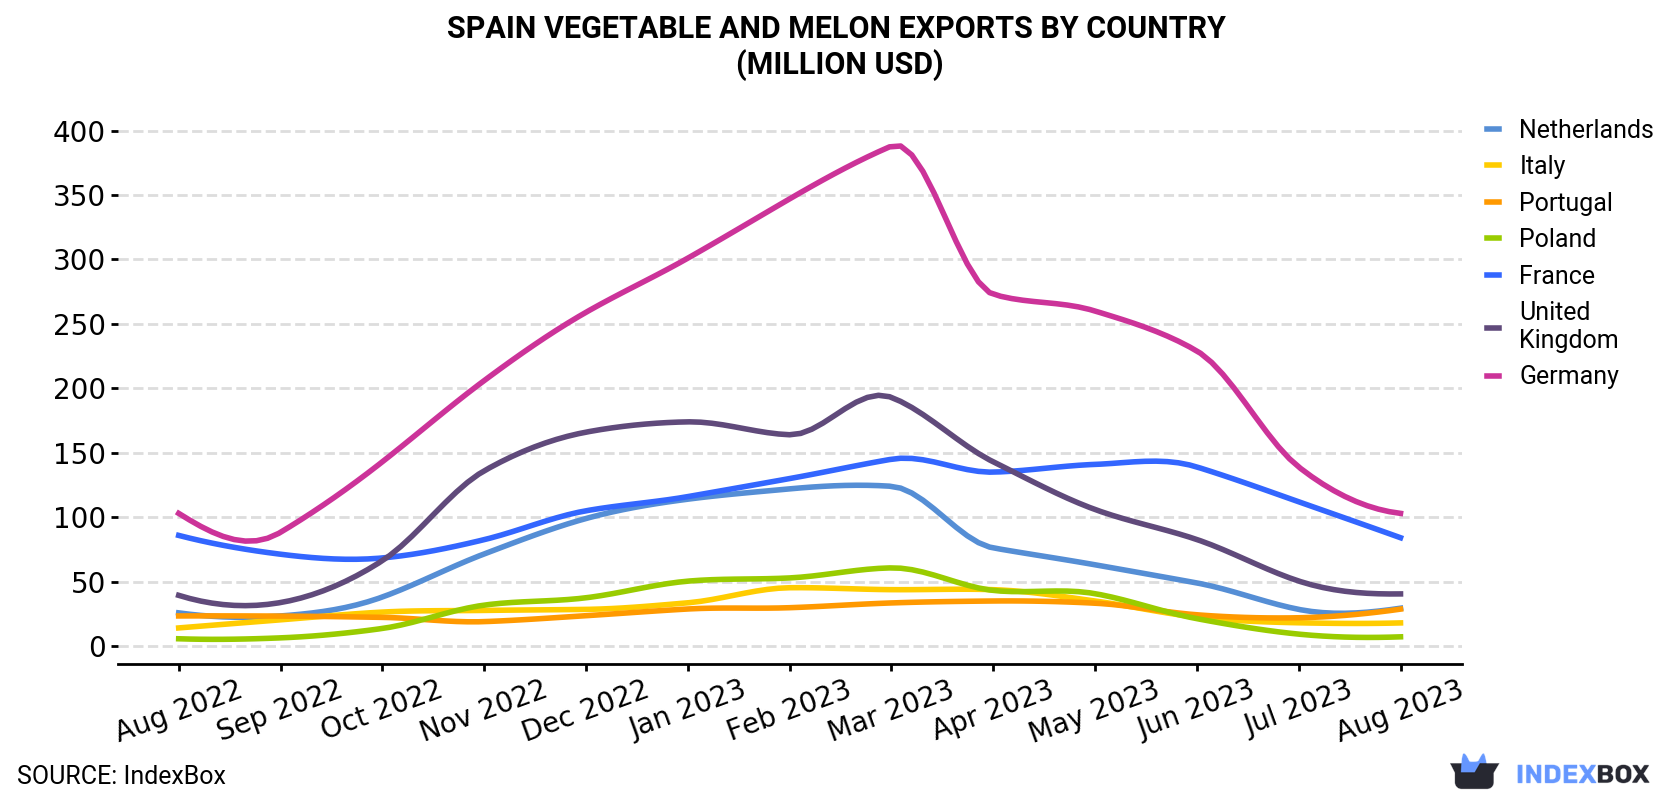 Spain Vegetable and Melon Exports By Country (Million USD)